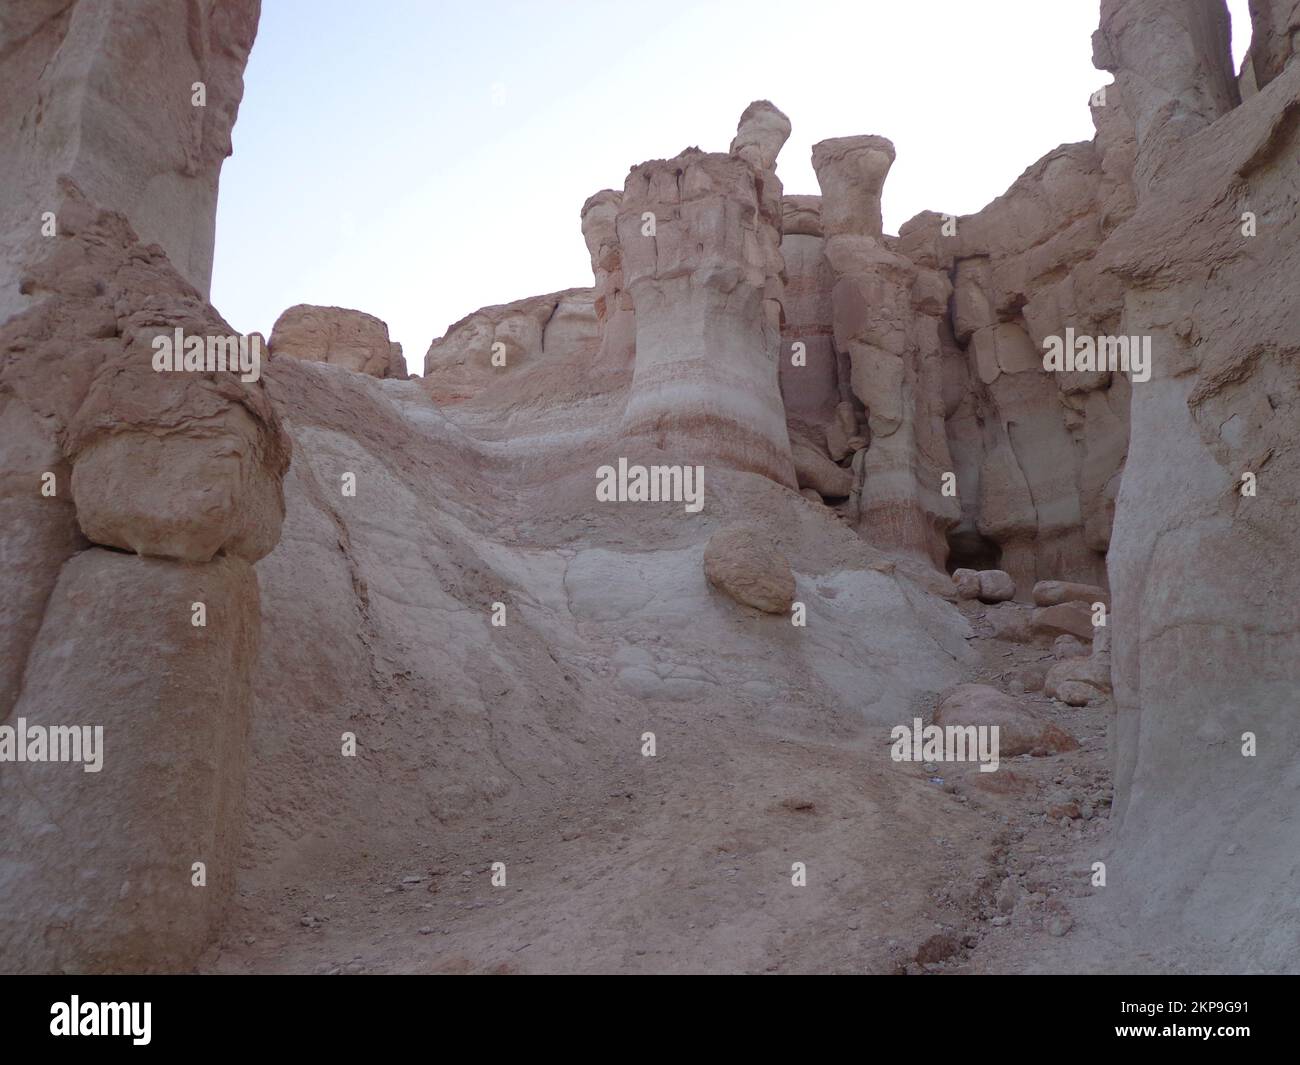 A scenic view of rock formations Al-Ahsa Oasis in Saudi Arabia Stock Photo